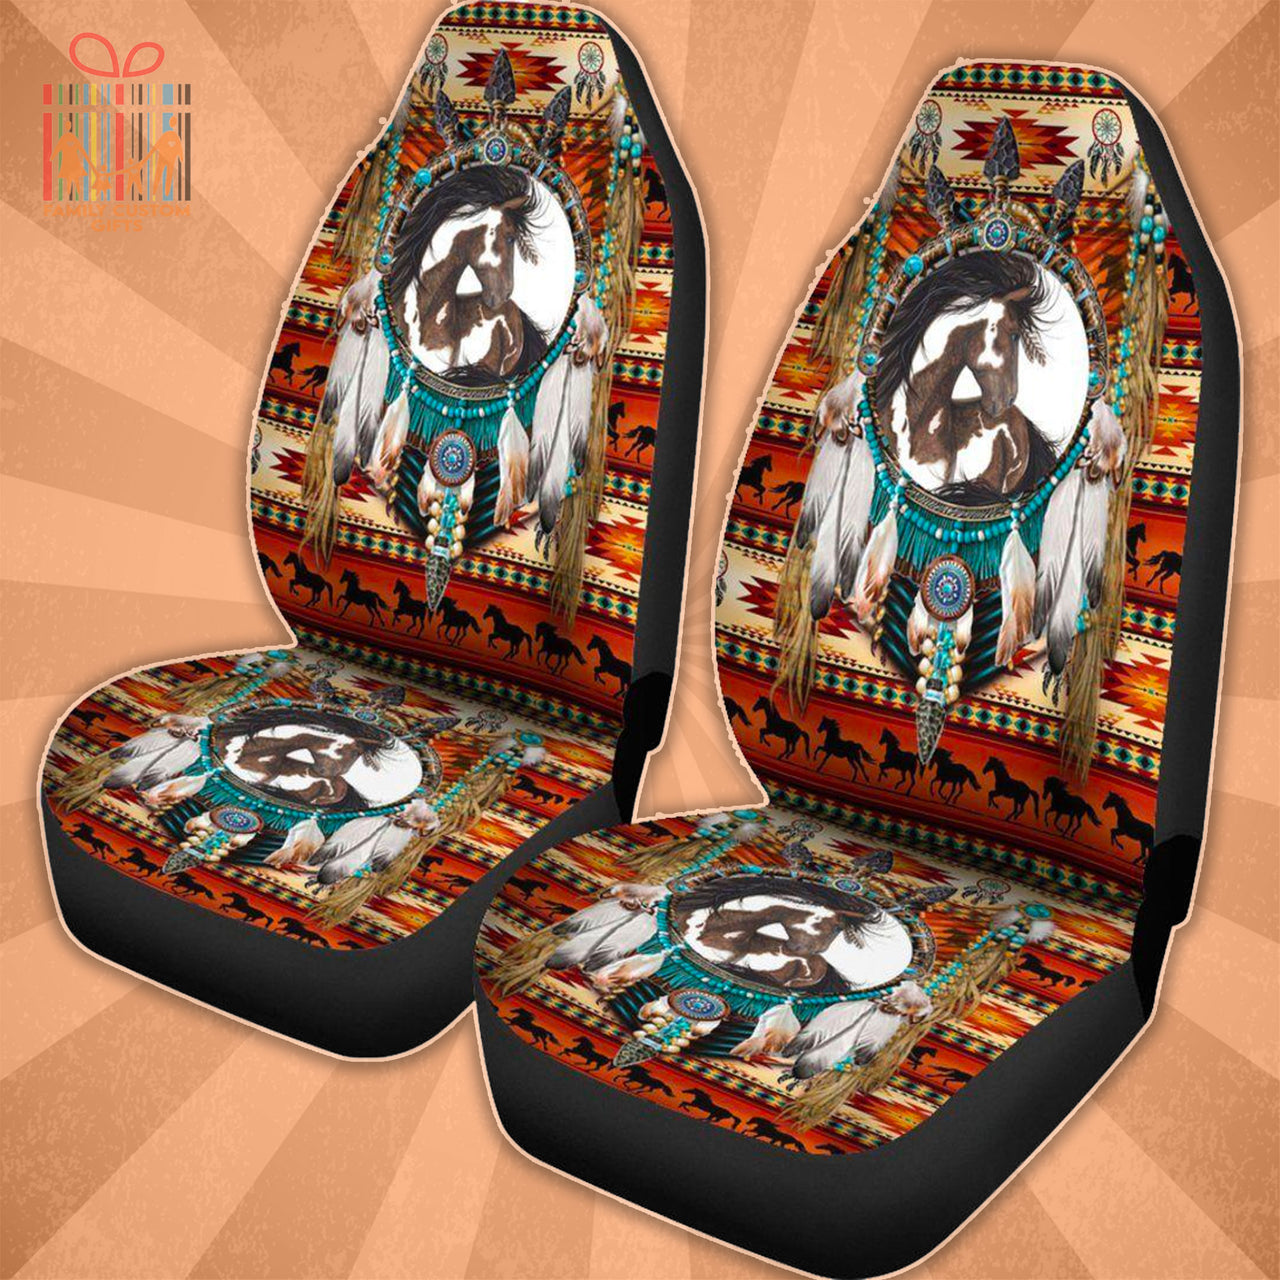 Custom Car Seat Cover Native American Tribal Horse Dreamcatcher Pattern Seat Covers for Cars